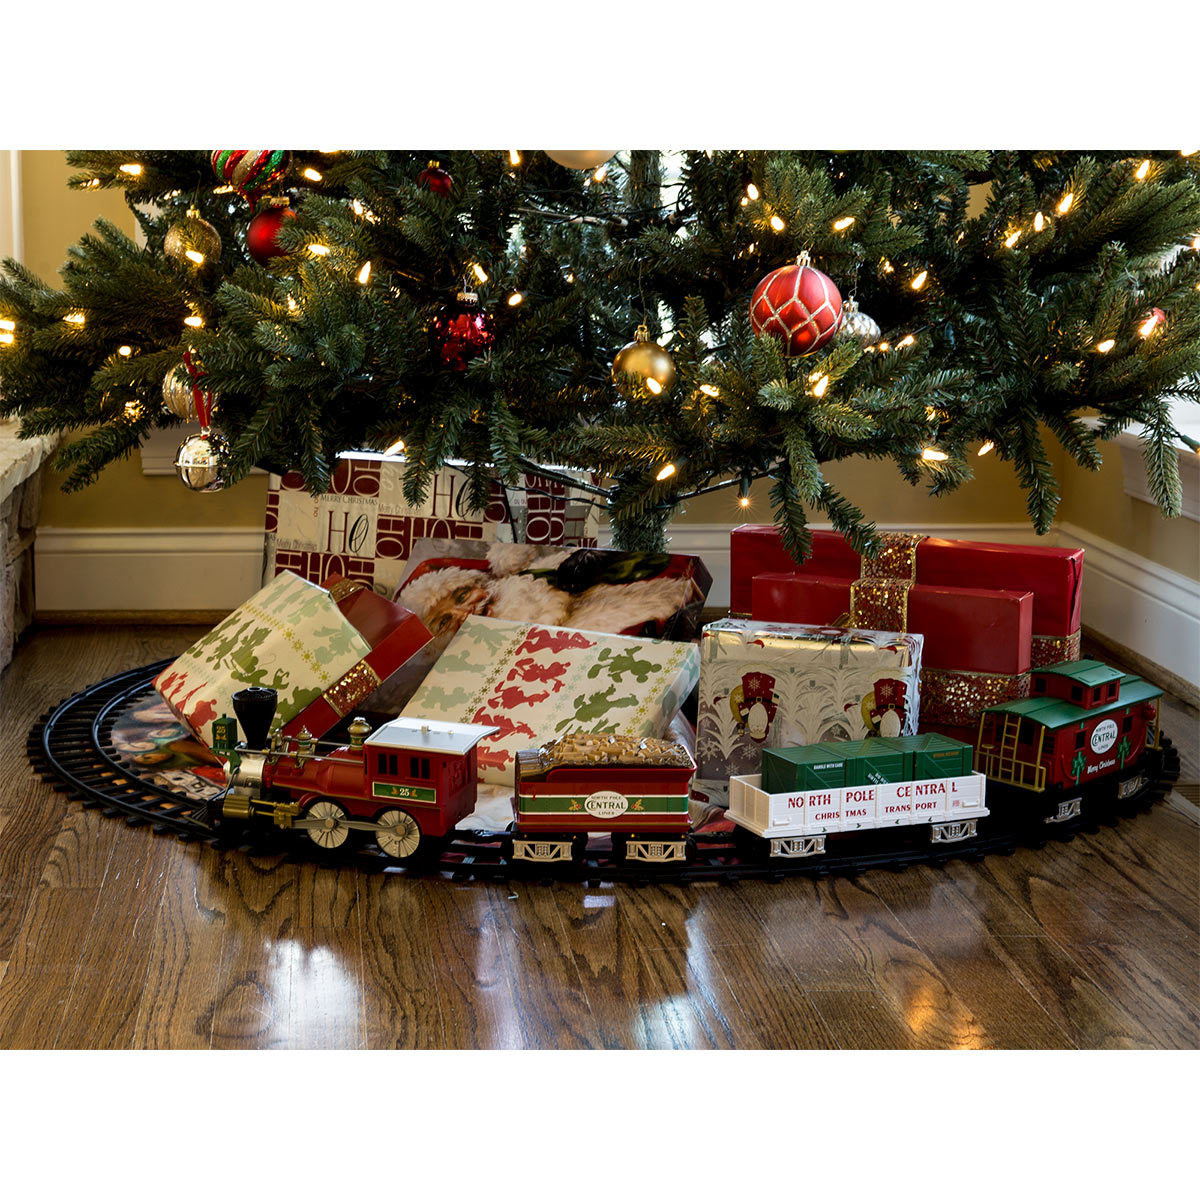 best train set for under christmas tree